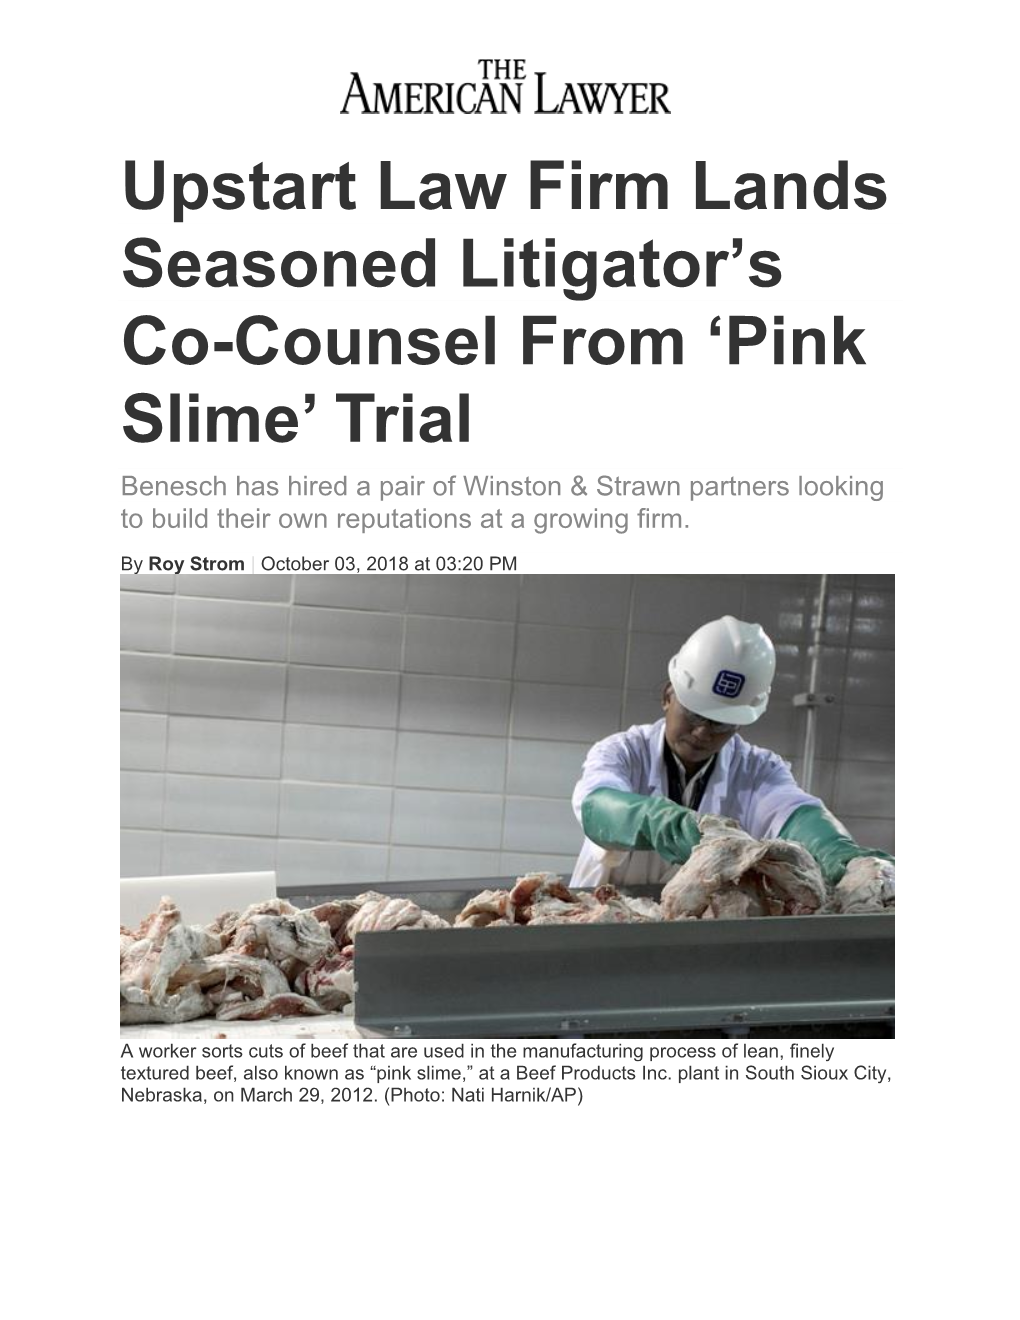 Pink Slime’ Trial Benesch Has Hired a Pair of Winston & Strawn Partners Looking to Build Their Own Reputations at a Growing Firm